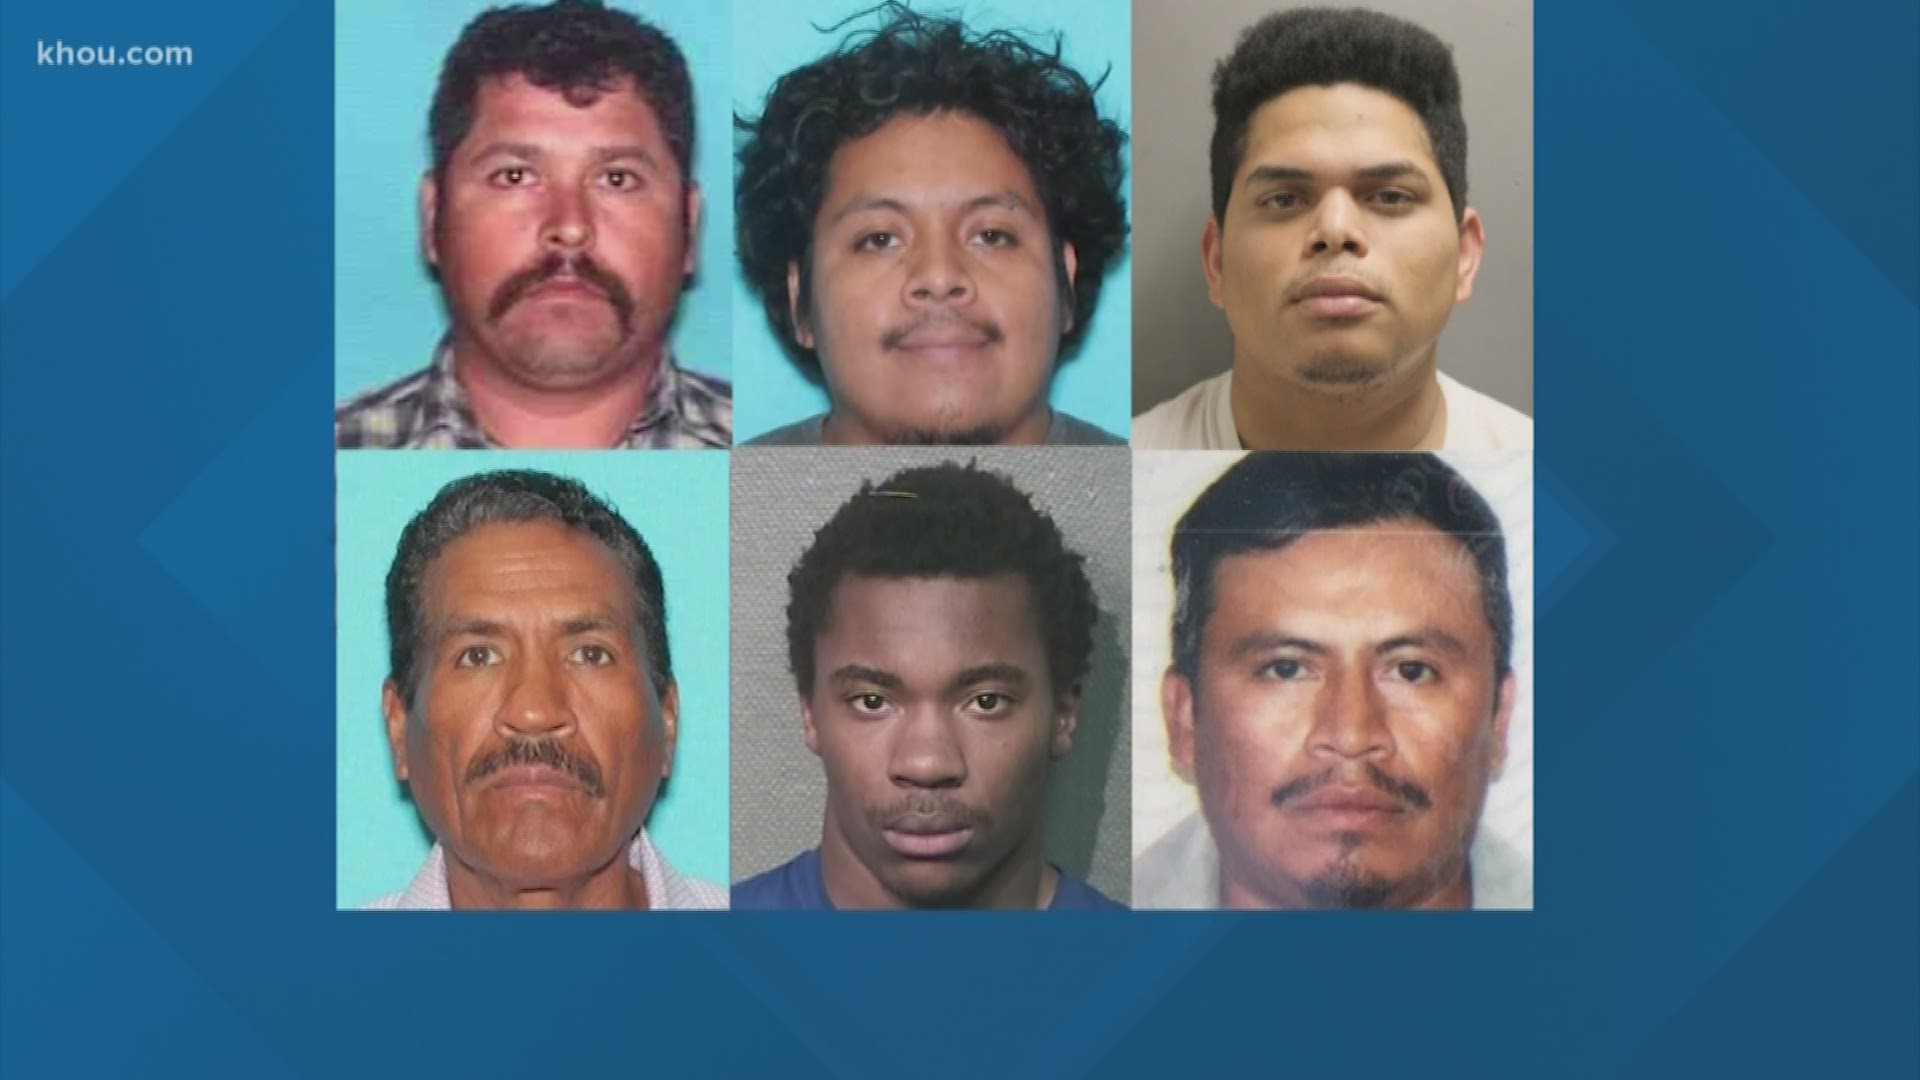 Houston police and Crime Stoppers are hoping the public can help locate these fugitives.